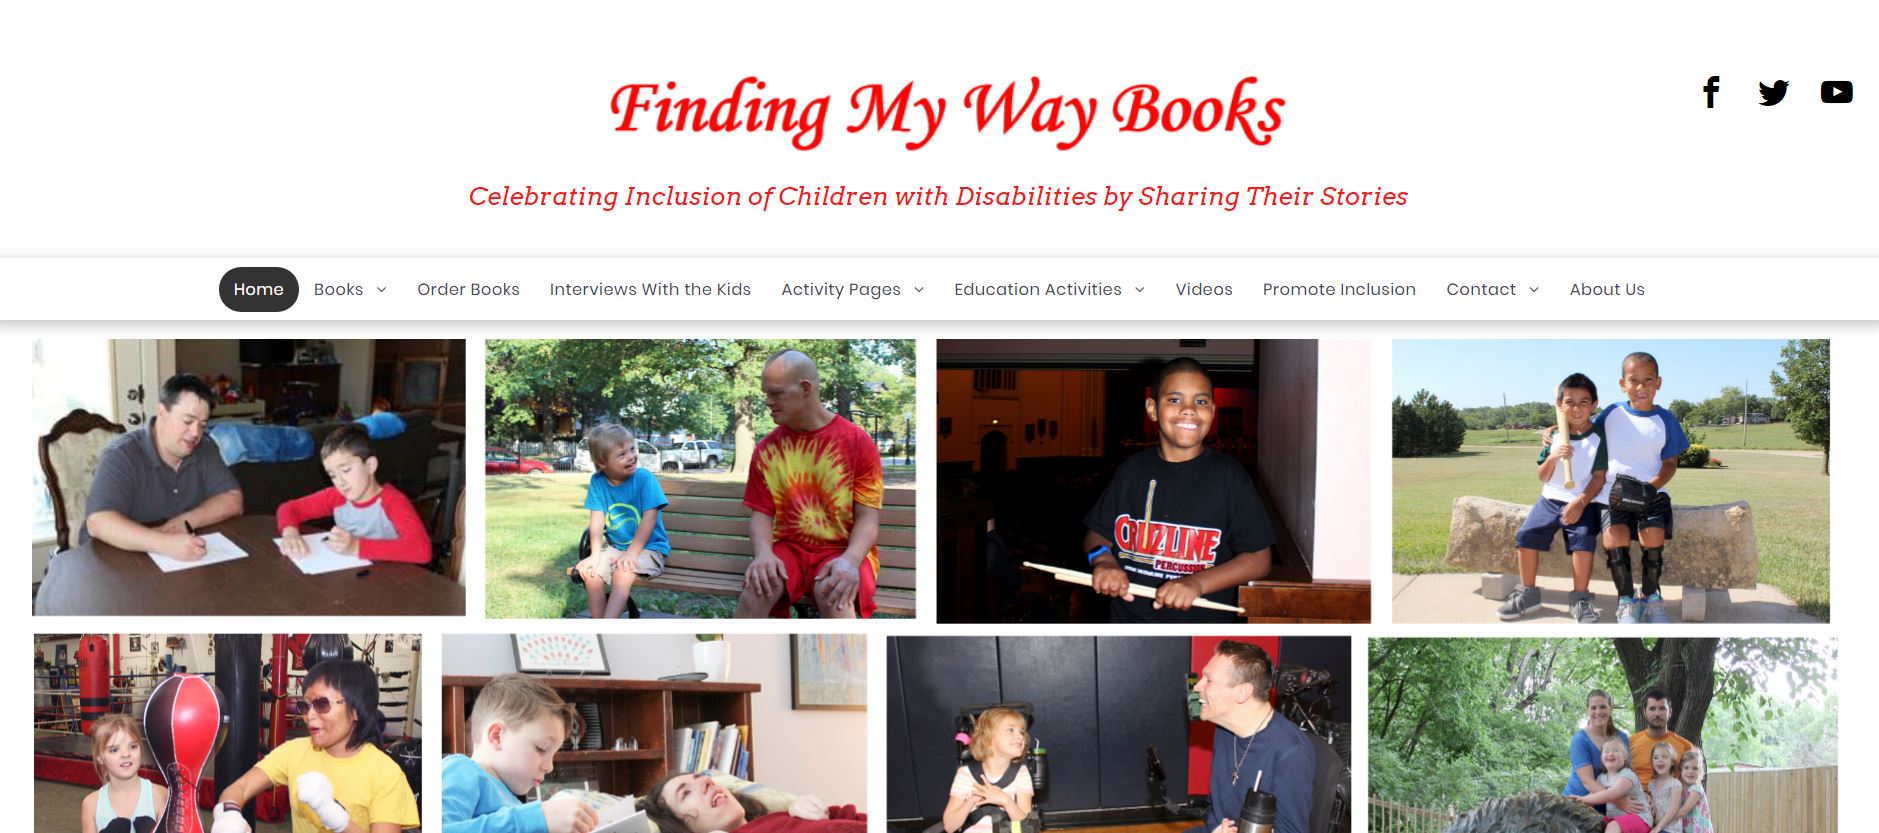 Inclusion Education - Finding My Way Books